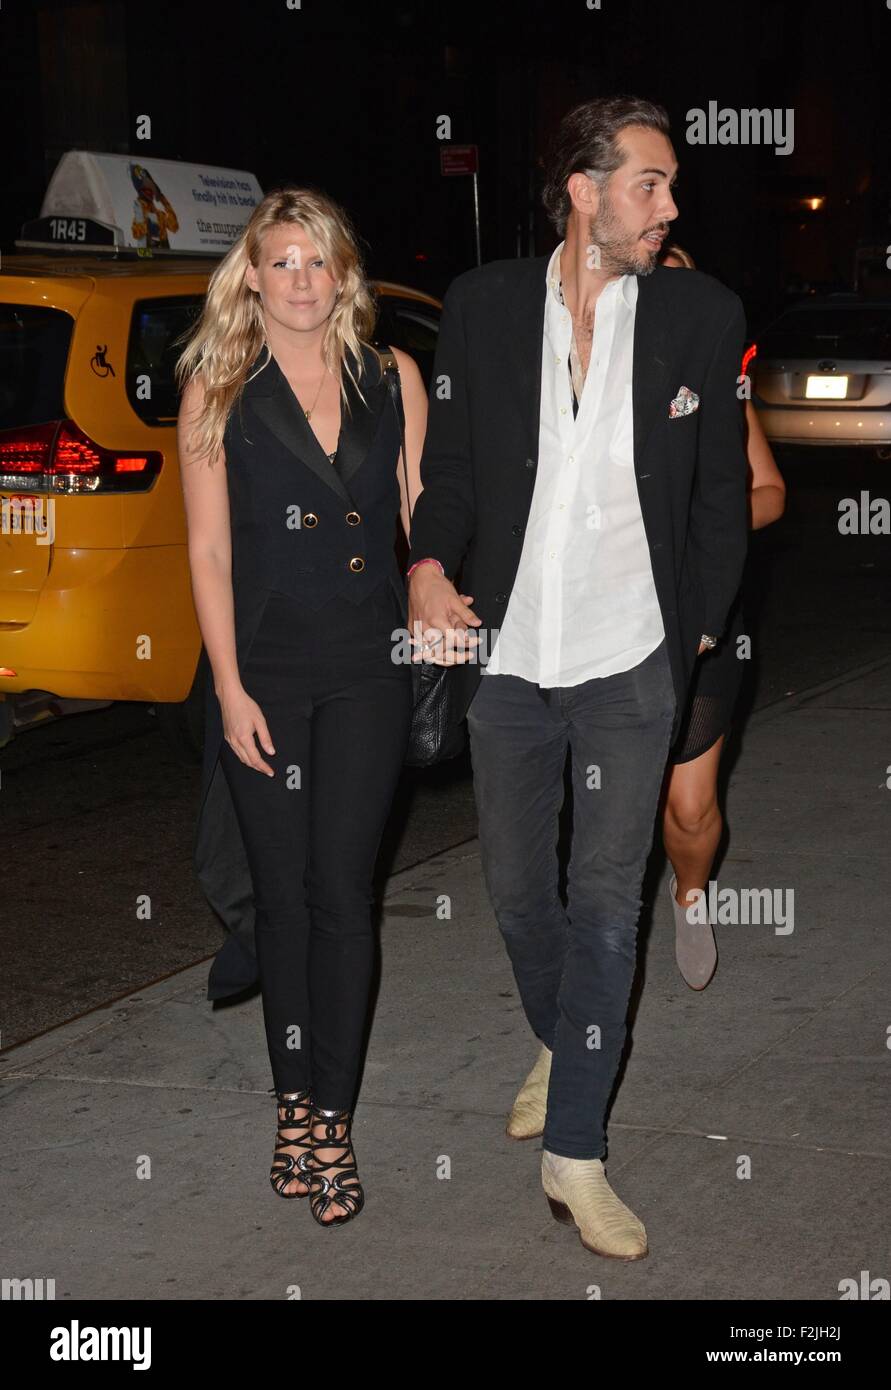 New York, NY, USA. 19th Sep, 2015. Alexandra Richards, Zander Bleck at arrivals for KEITH RICHARDS: UNDER THE INFLUENCE Screening, Museum of Modern Art (MoMA), New York, NY September 19, 2015. Credit:  Derek Storm/Everett Collection/Alamy Live News Stock Photo